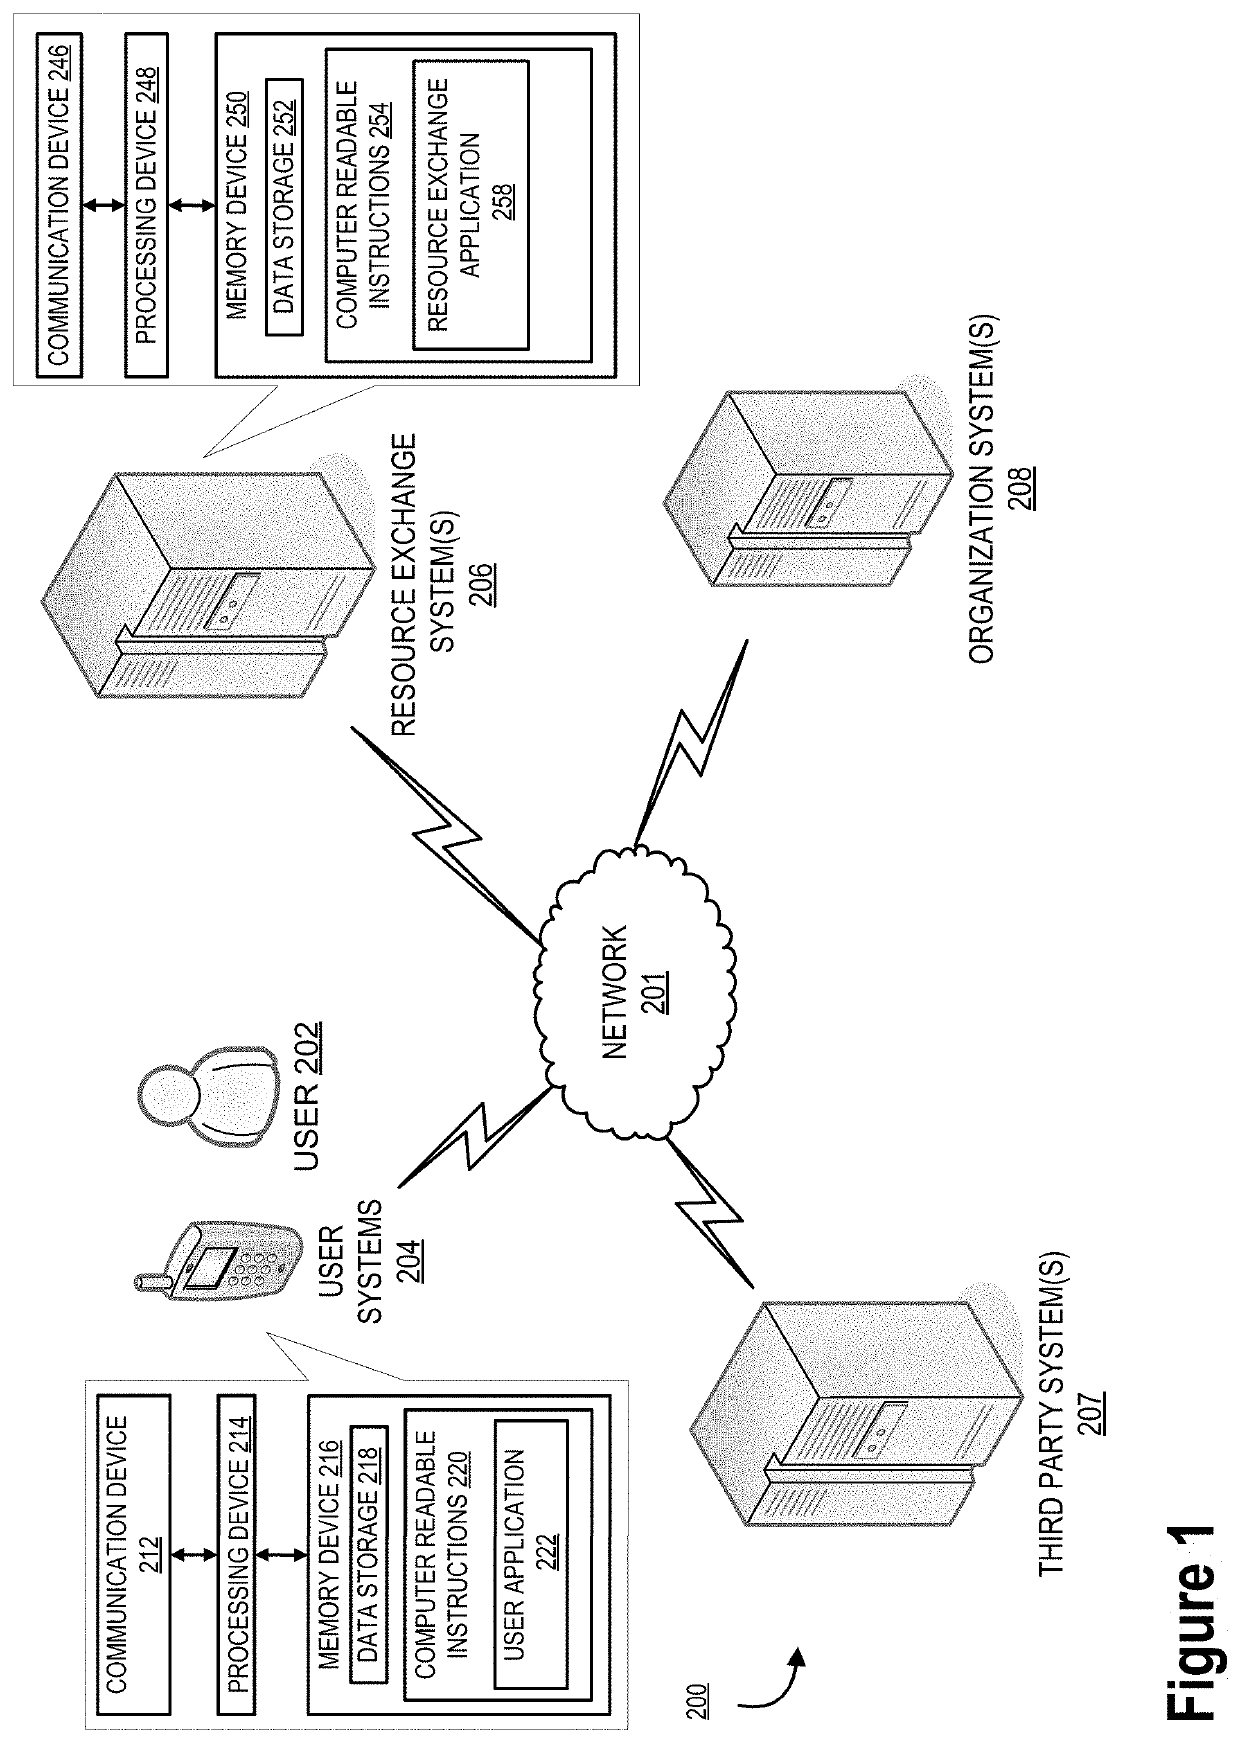 System for network resource exchanging